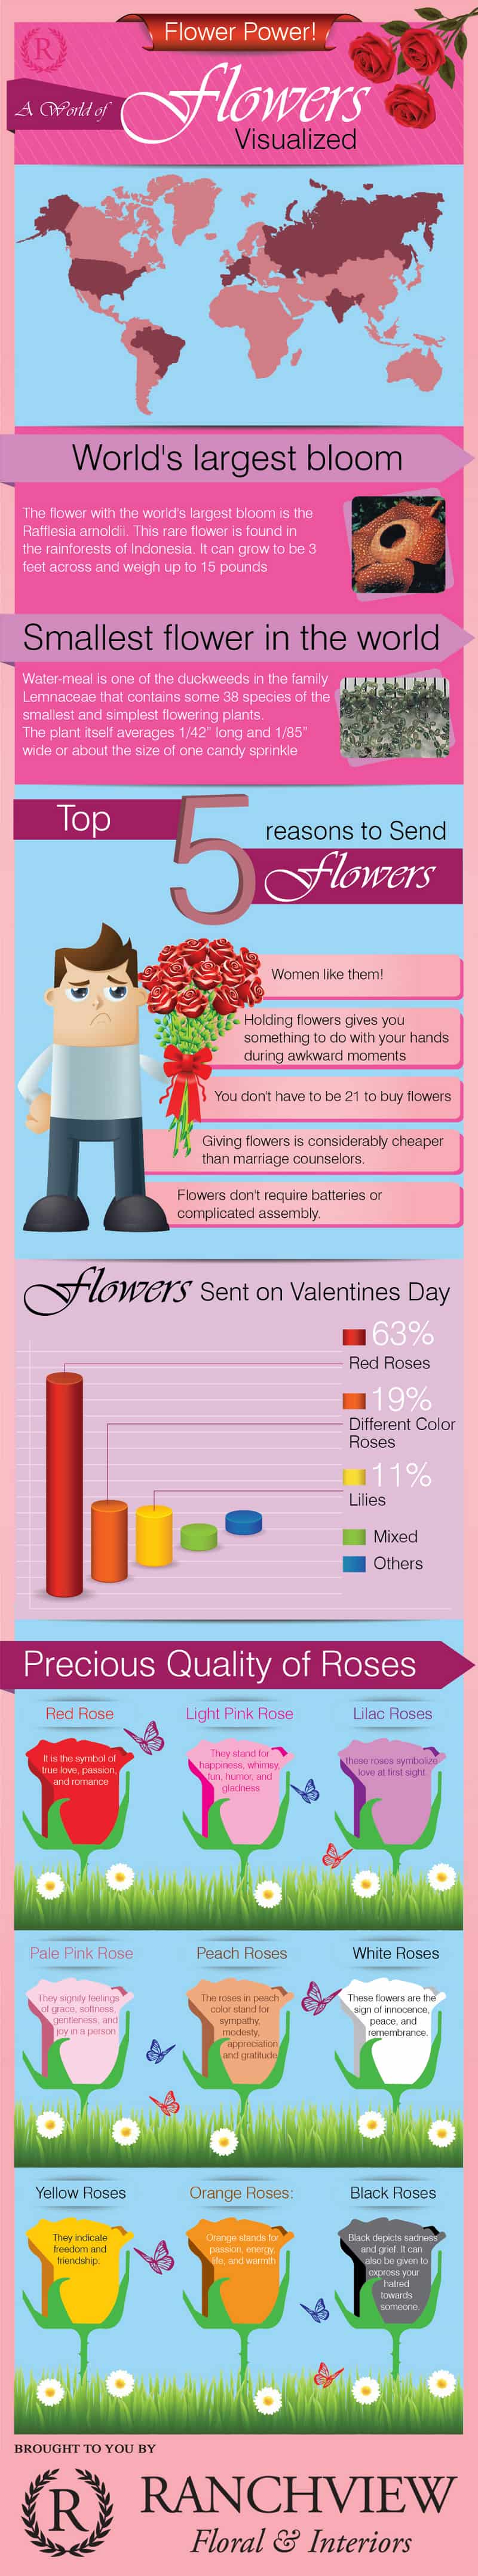 Interesting-Facts-About-Flowers